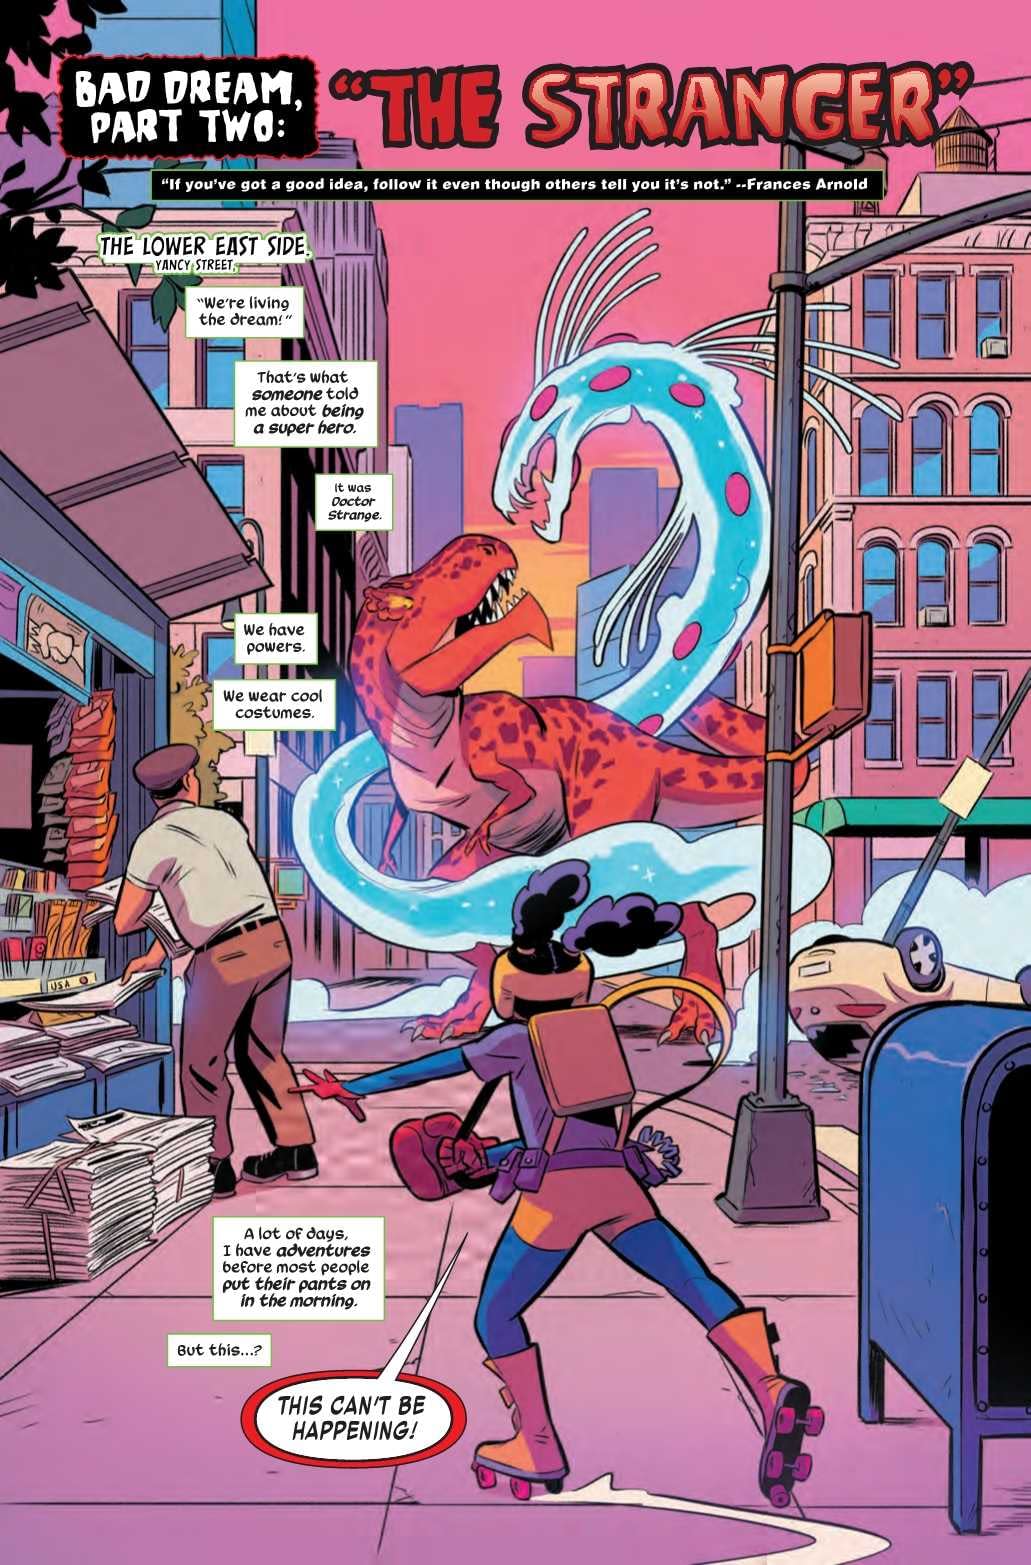 That's Gratitude for Ya in Next Week's Moon Girl and Devil Dinosaur #39